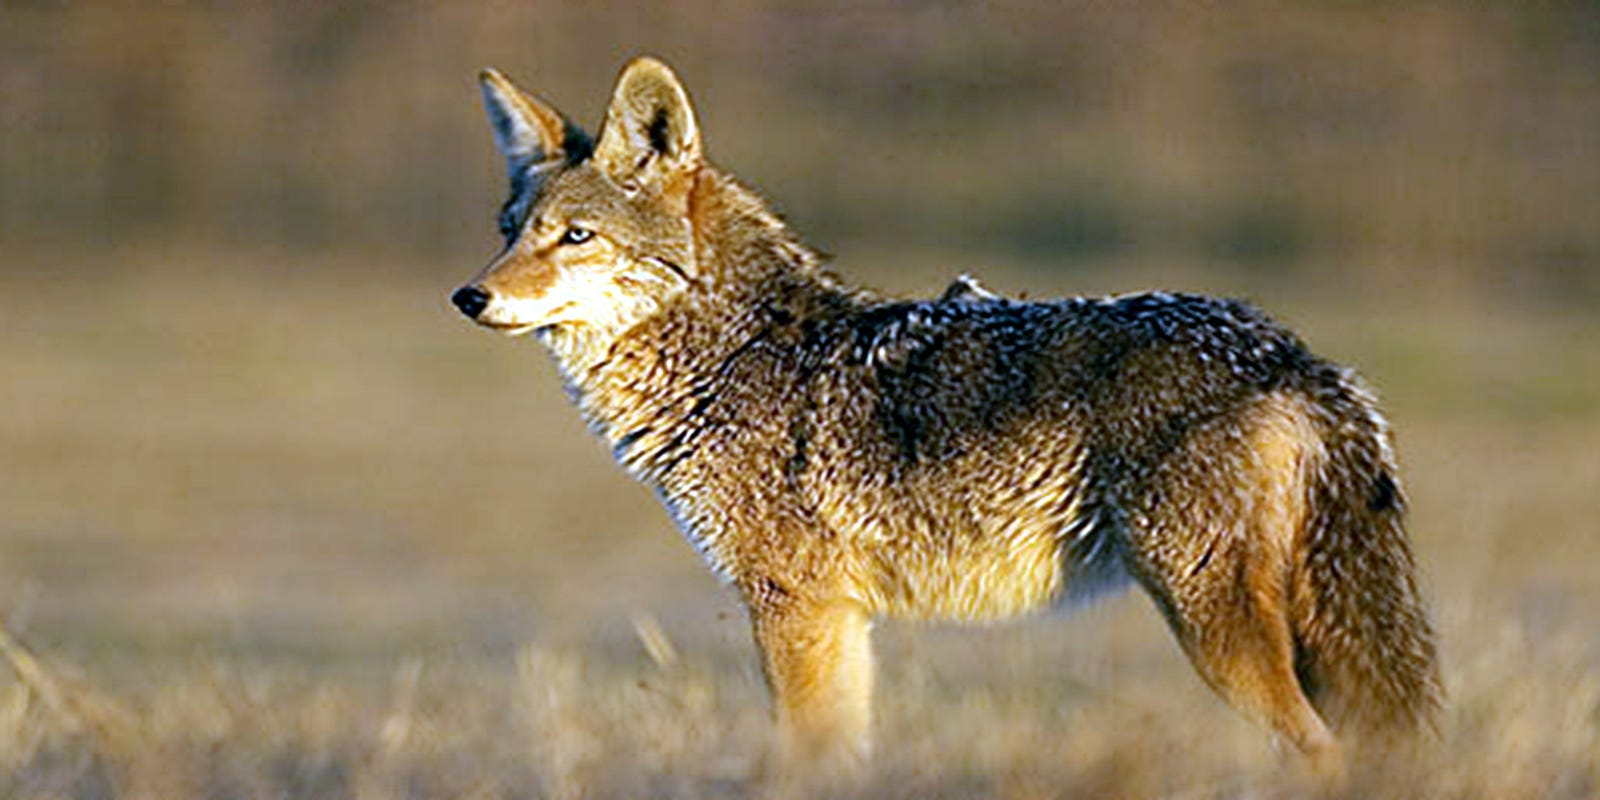 Proposed bill would put a bounty on coyotes in South Carolina